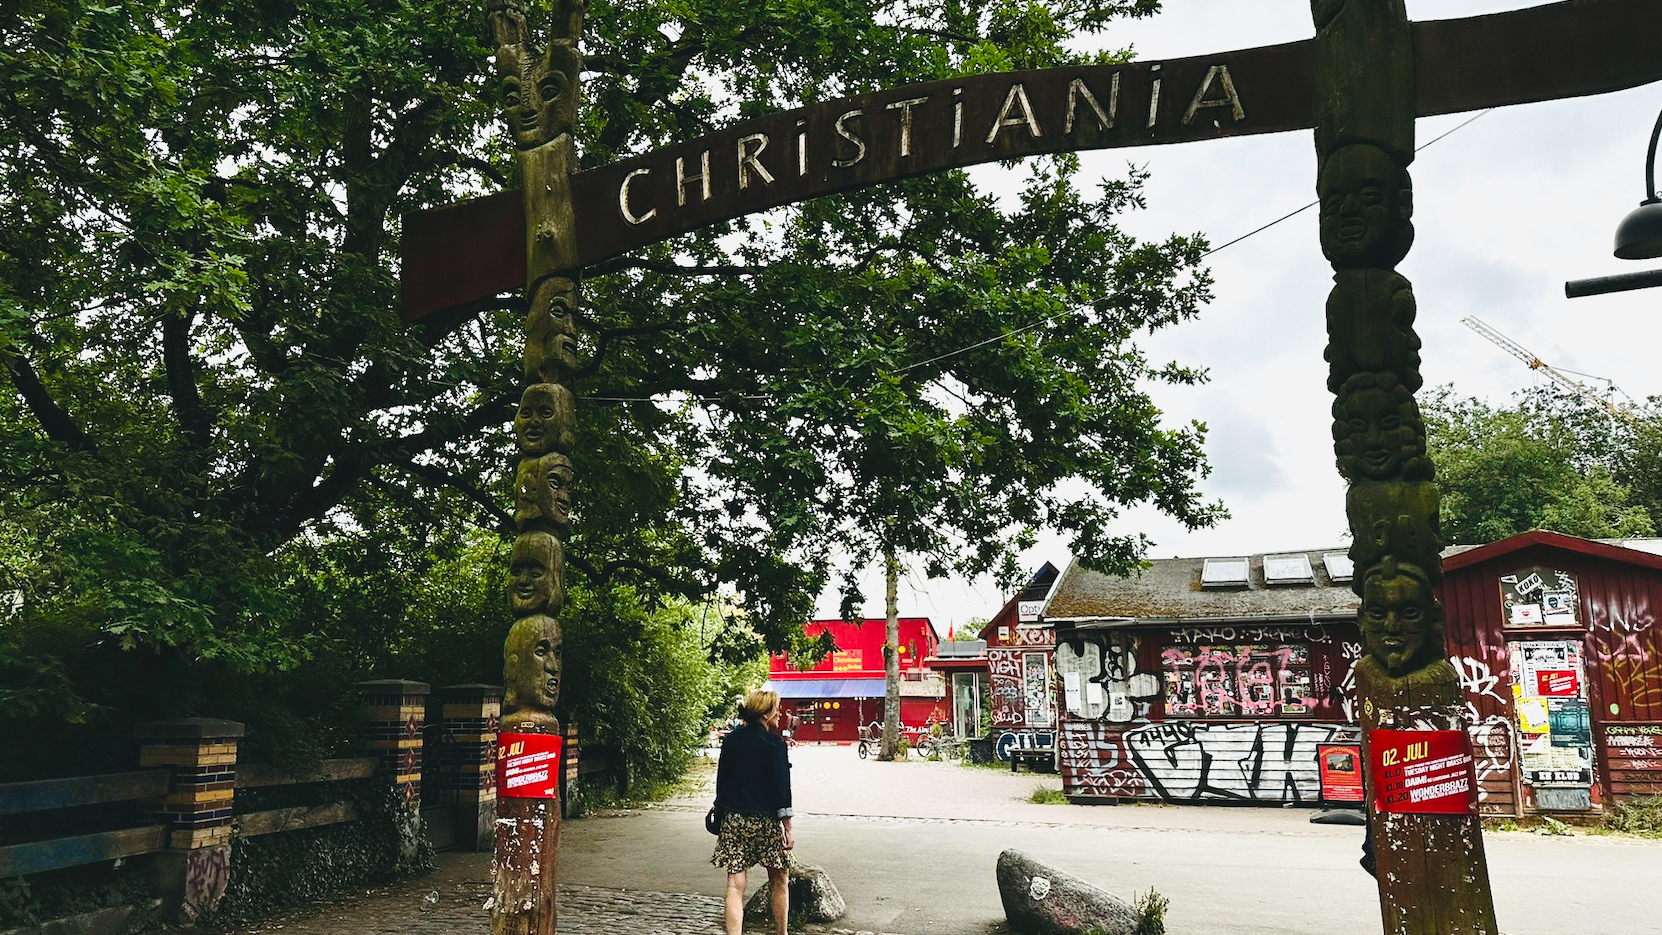 The entrance to Freetown Christiania, Copenhagen. /Mearns